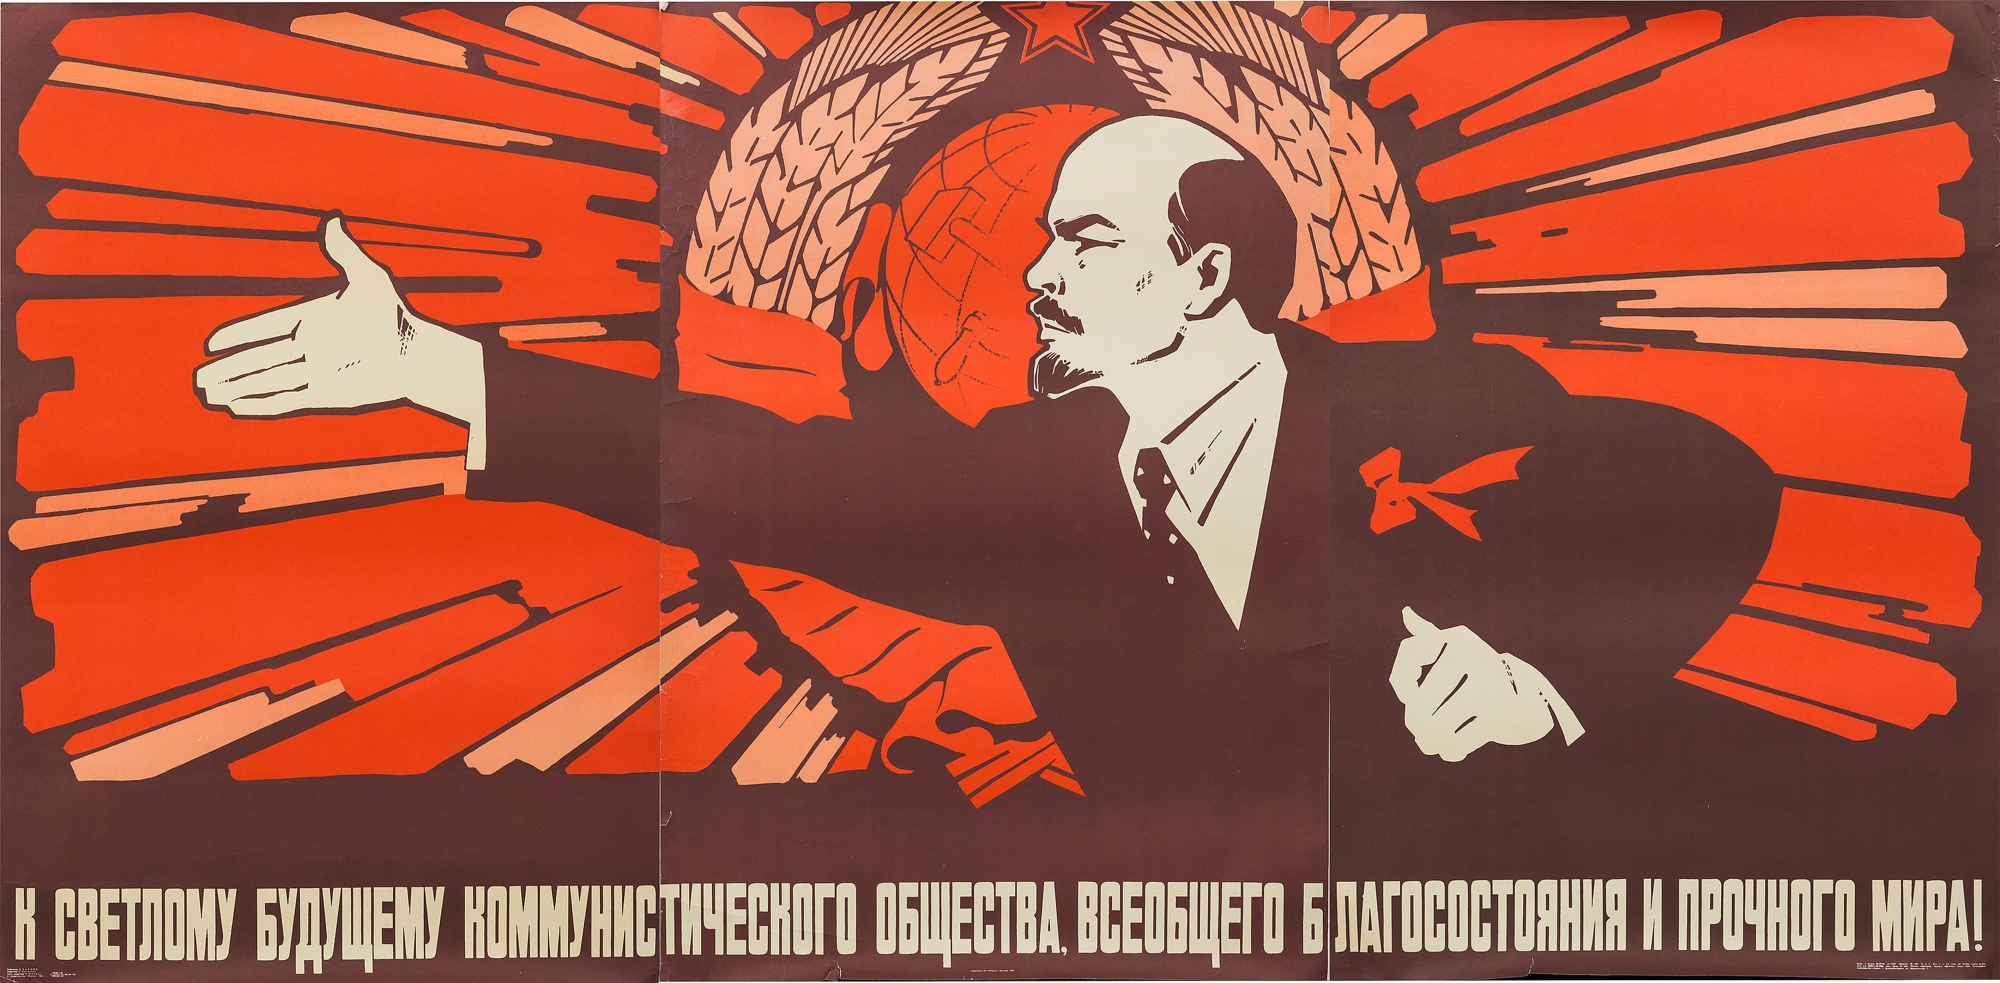 The Soviet Union May Have Imploded 30 Years Ago, But It's Not Dead